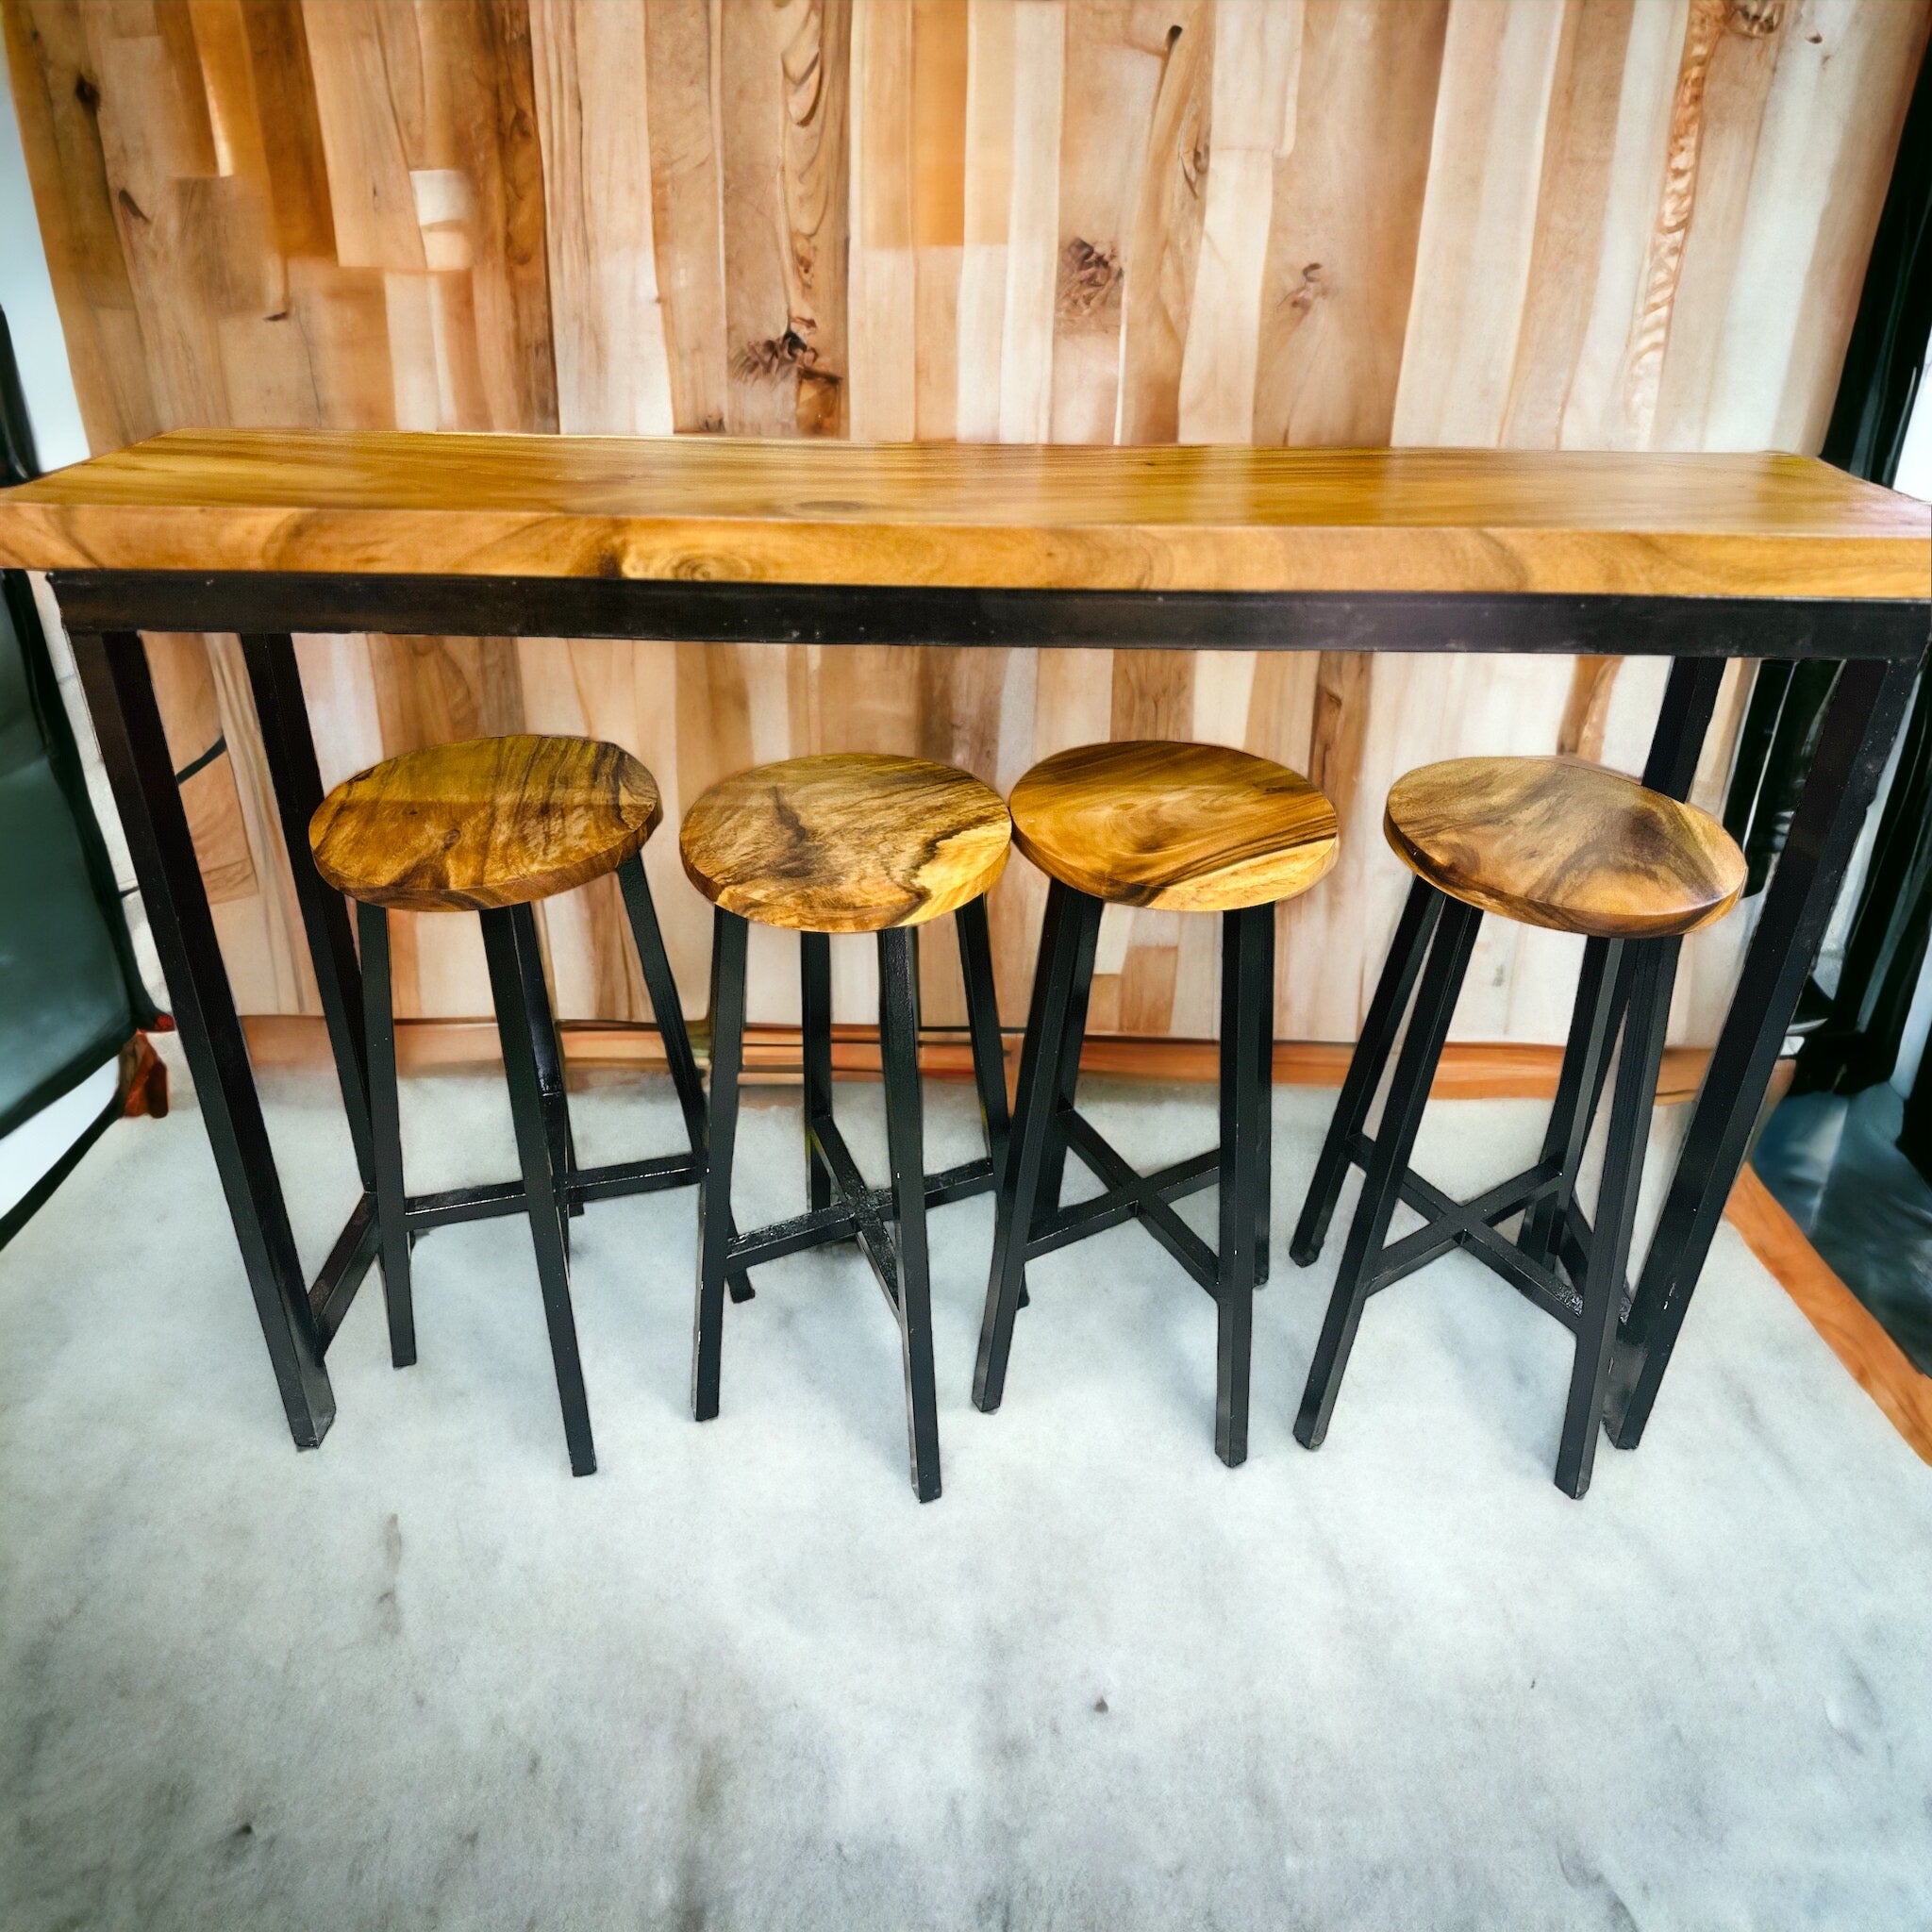 FURNITURE- BAR TABLE with 4 CHAIRS set (BLACK)